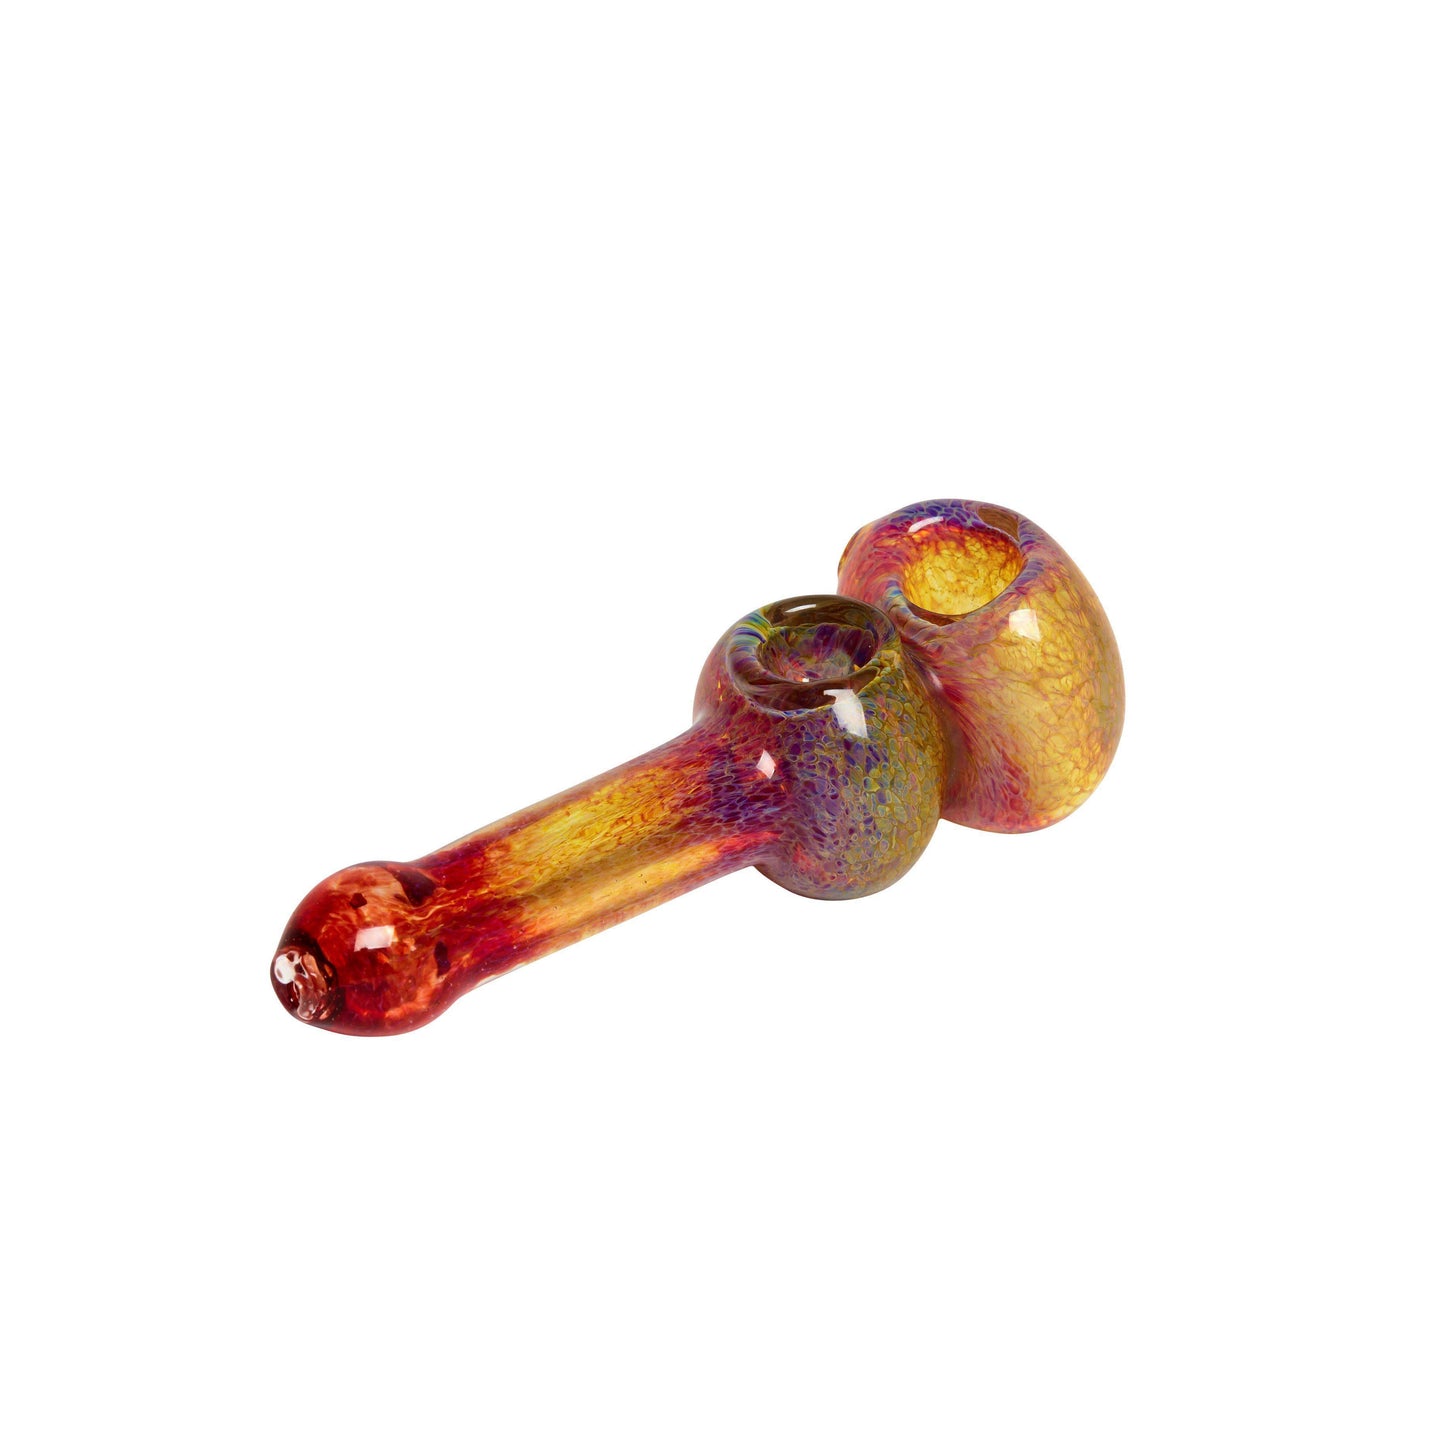 6-inch glass double-bowled pipe smoking device tropical fish scale swirling colors fun aquatic design